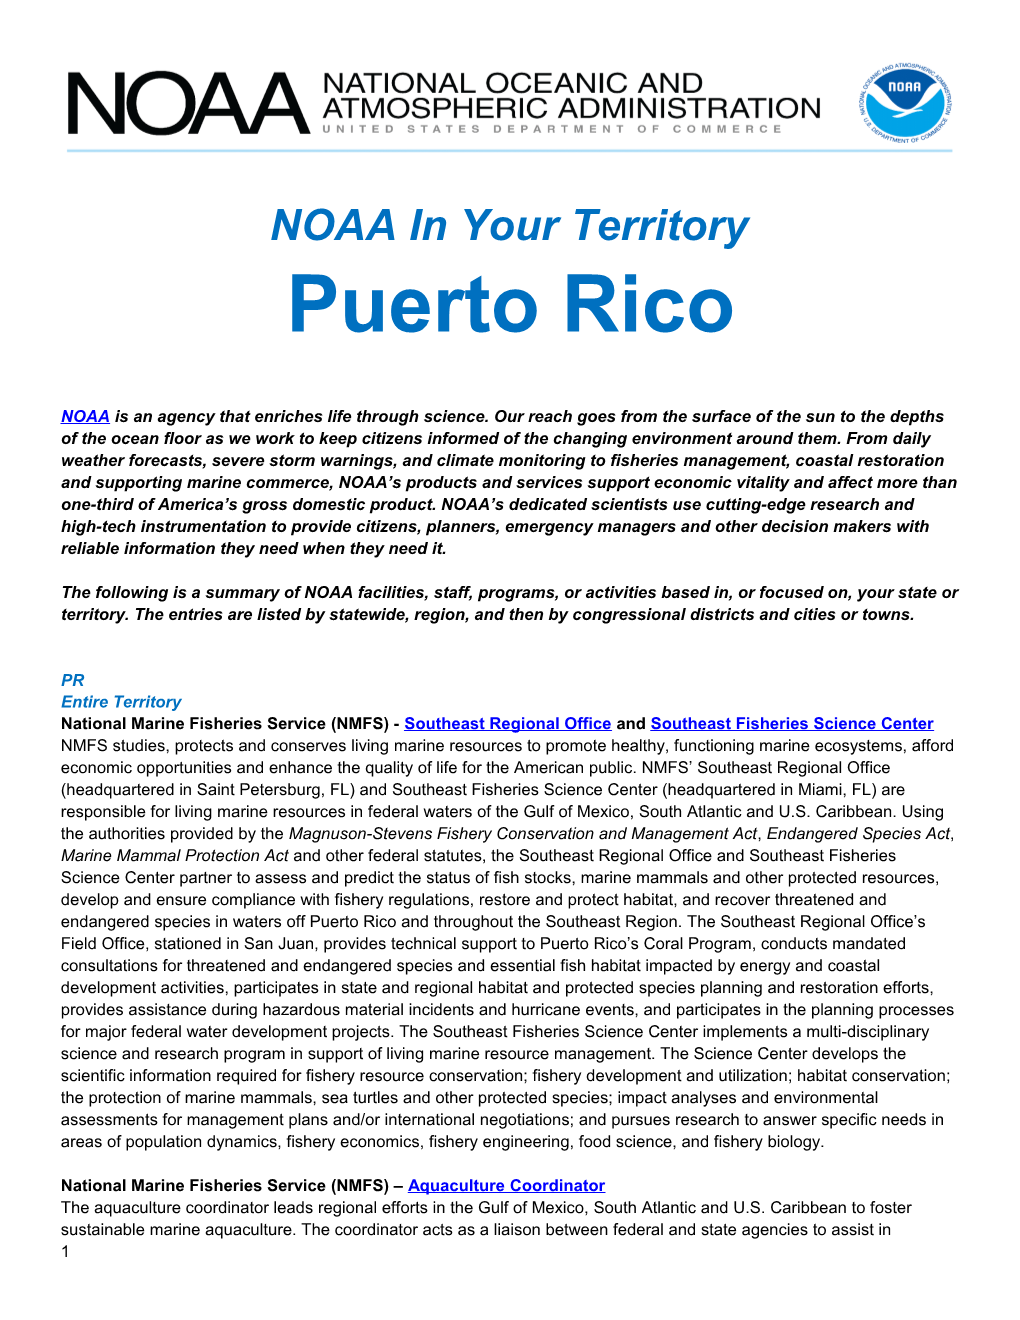 NOAA in Your State - Puerto Rico